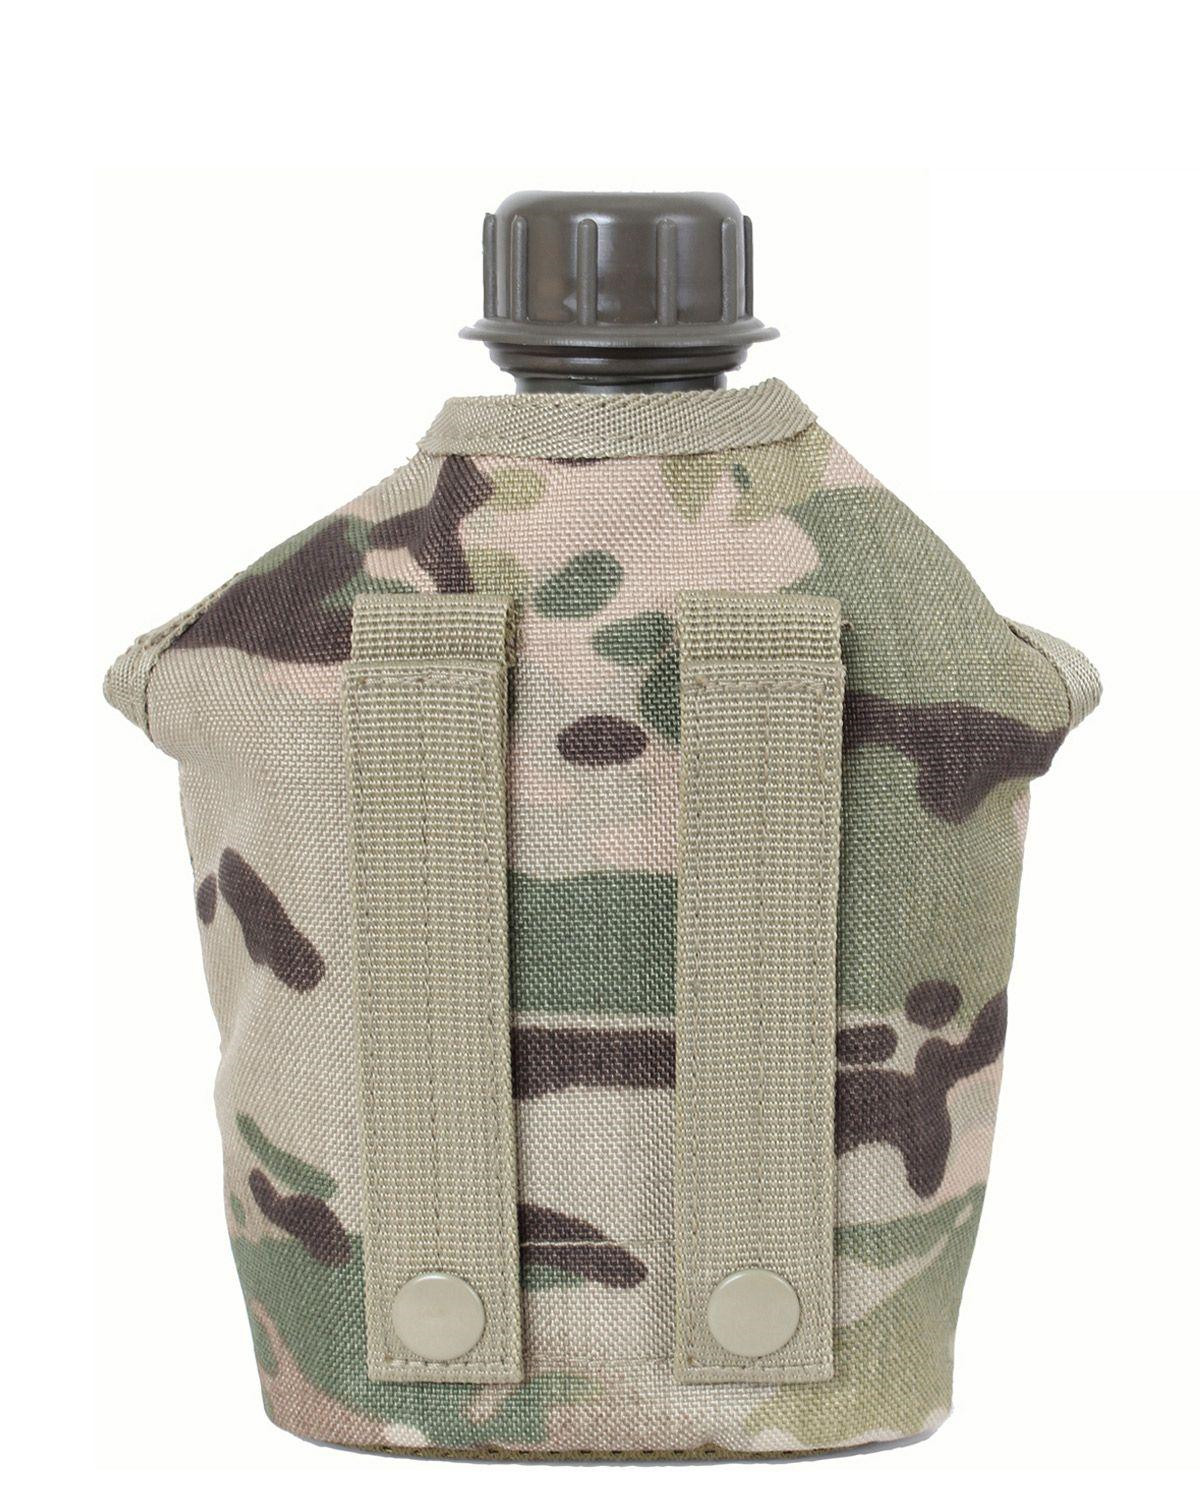 Waterbottle Cover Multicam Molle Canteen